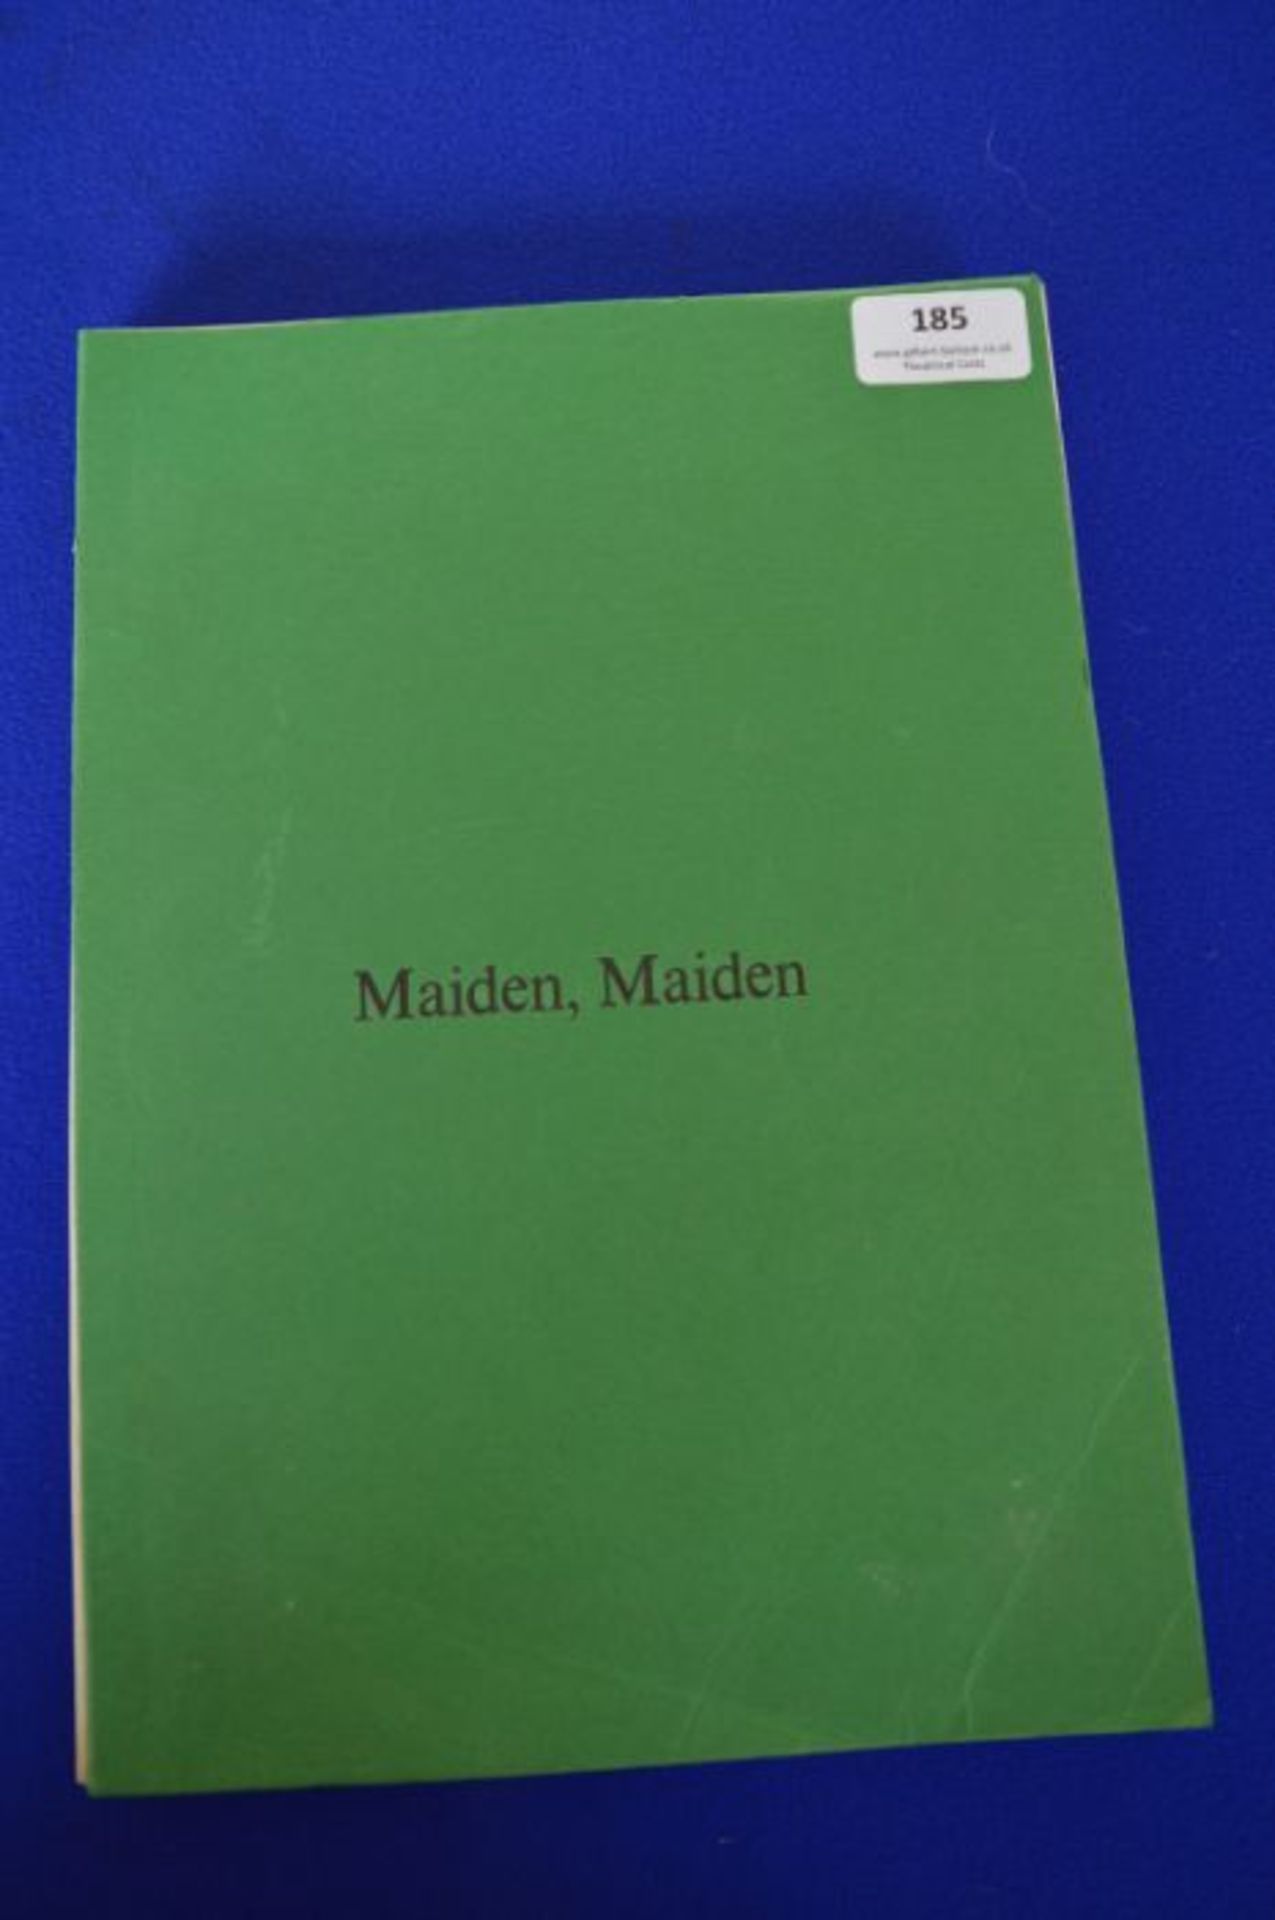 *Film Screenplay for Maiden, Maiden by Michael Austin 1980 - Image 2 of 2